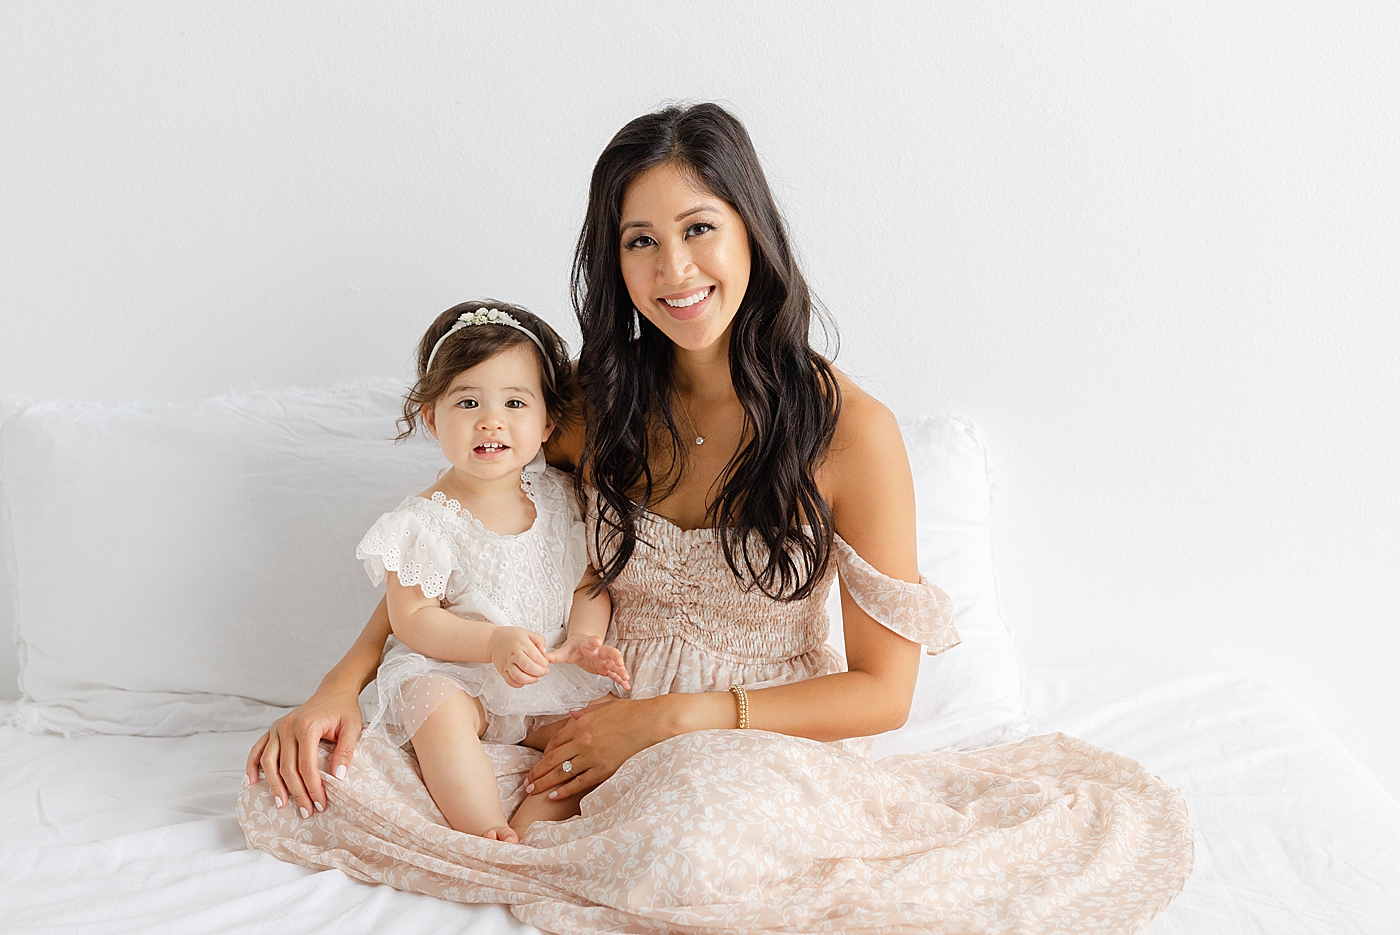 Mom and baby girl sitting on a white bed during her one year studio milestone session | Image by Sana Ahmed Photography